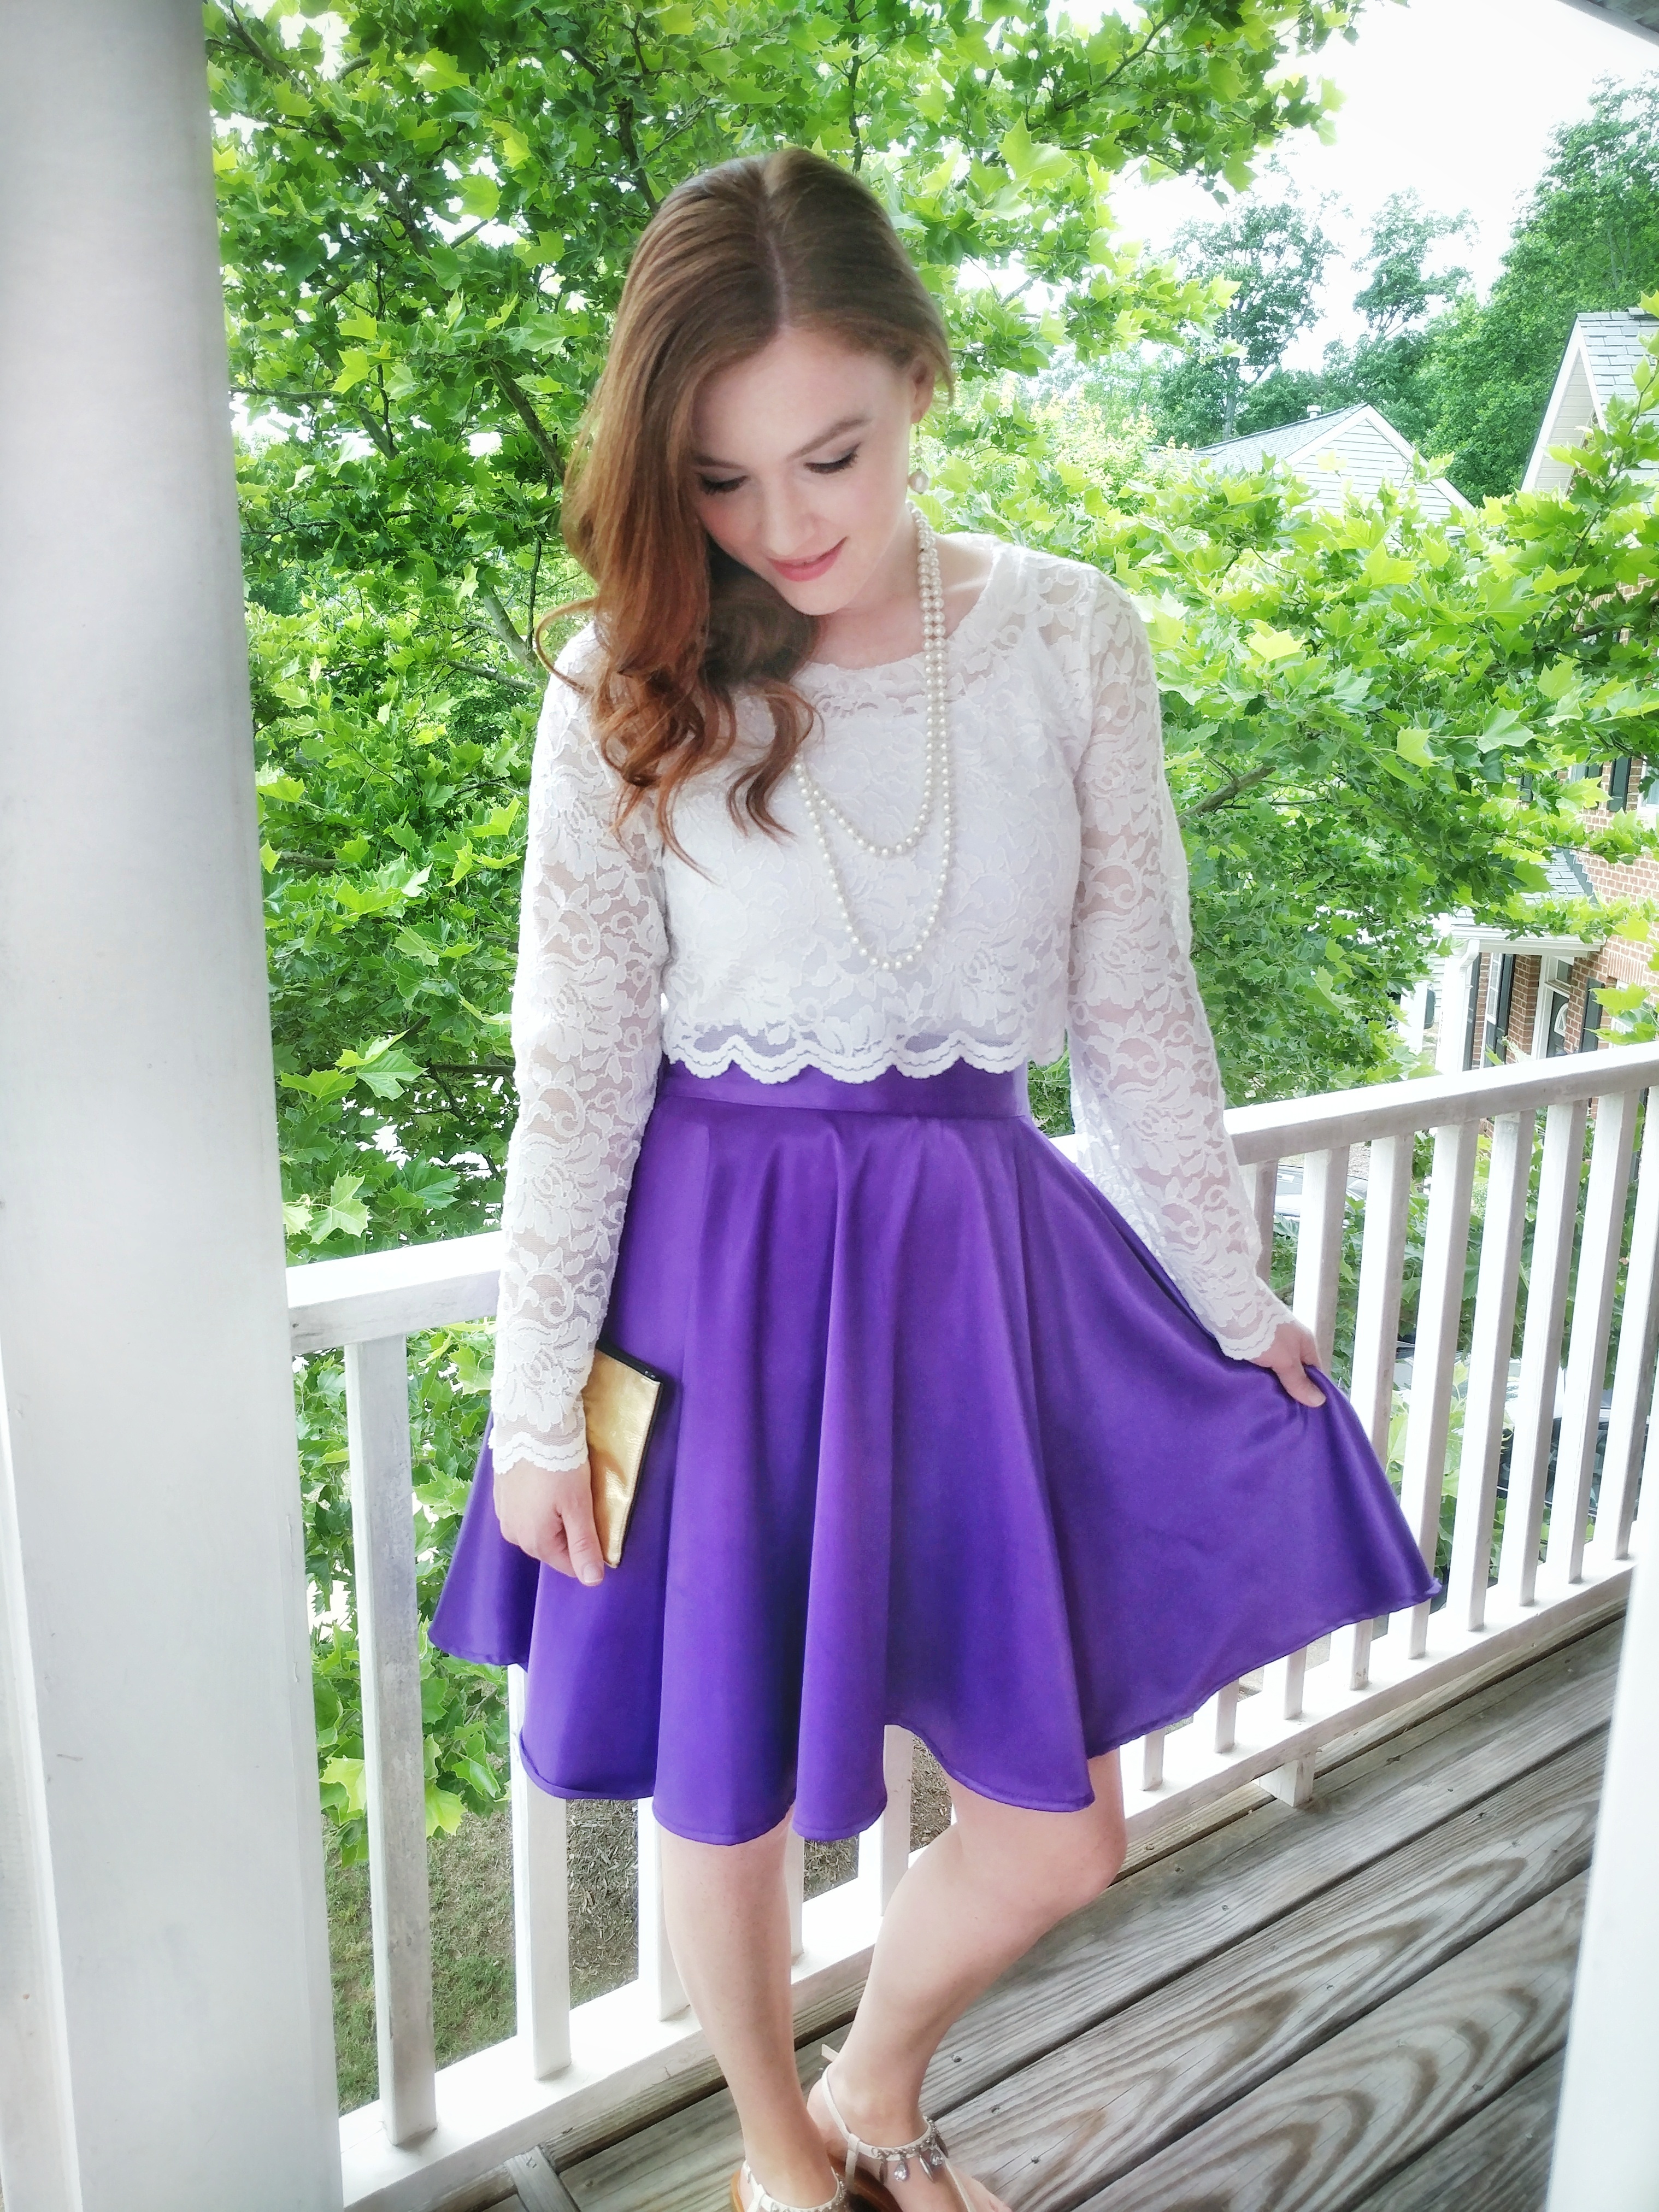 Purple skirt paired with a lace crop top